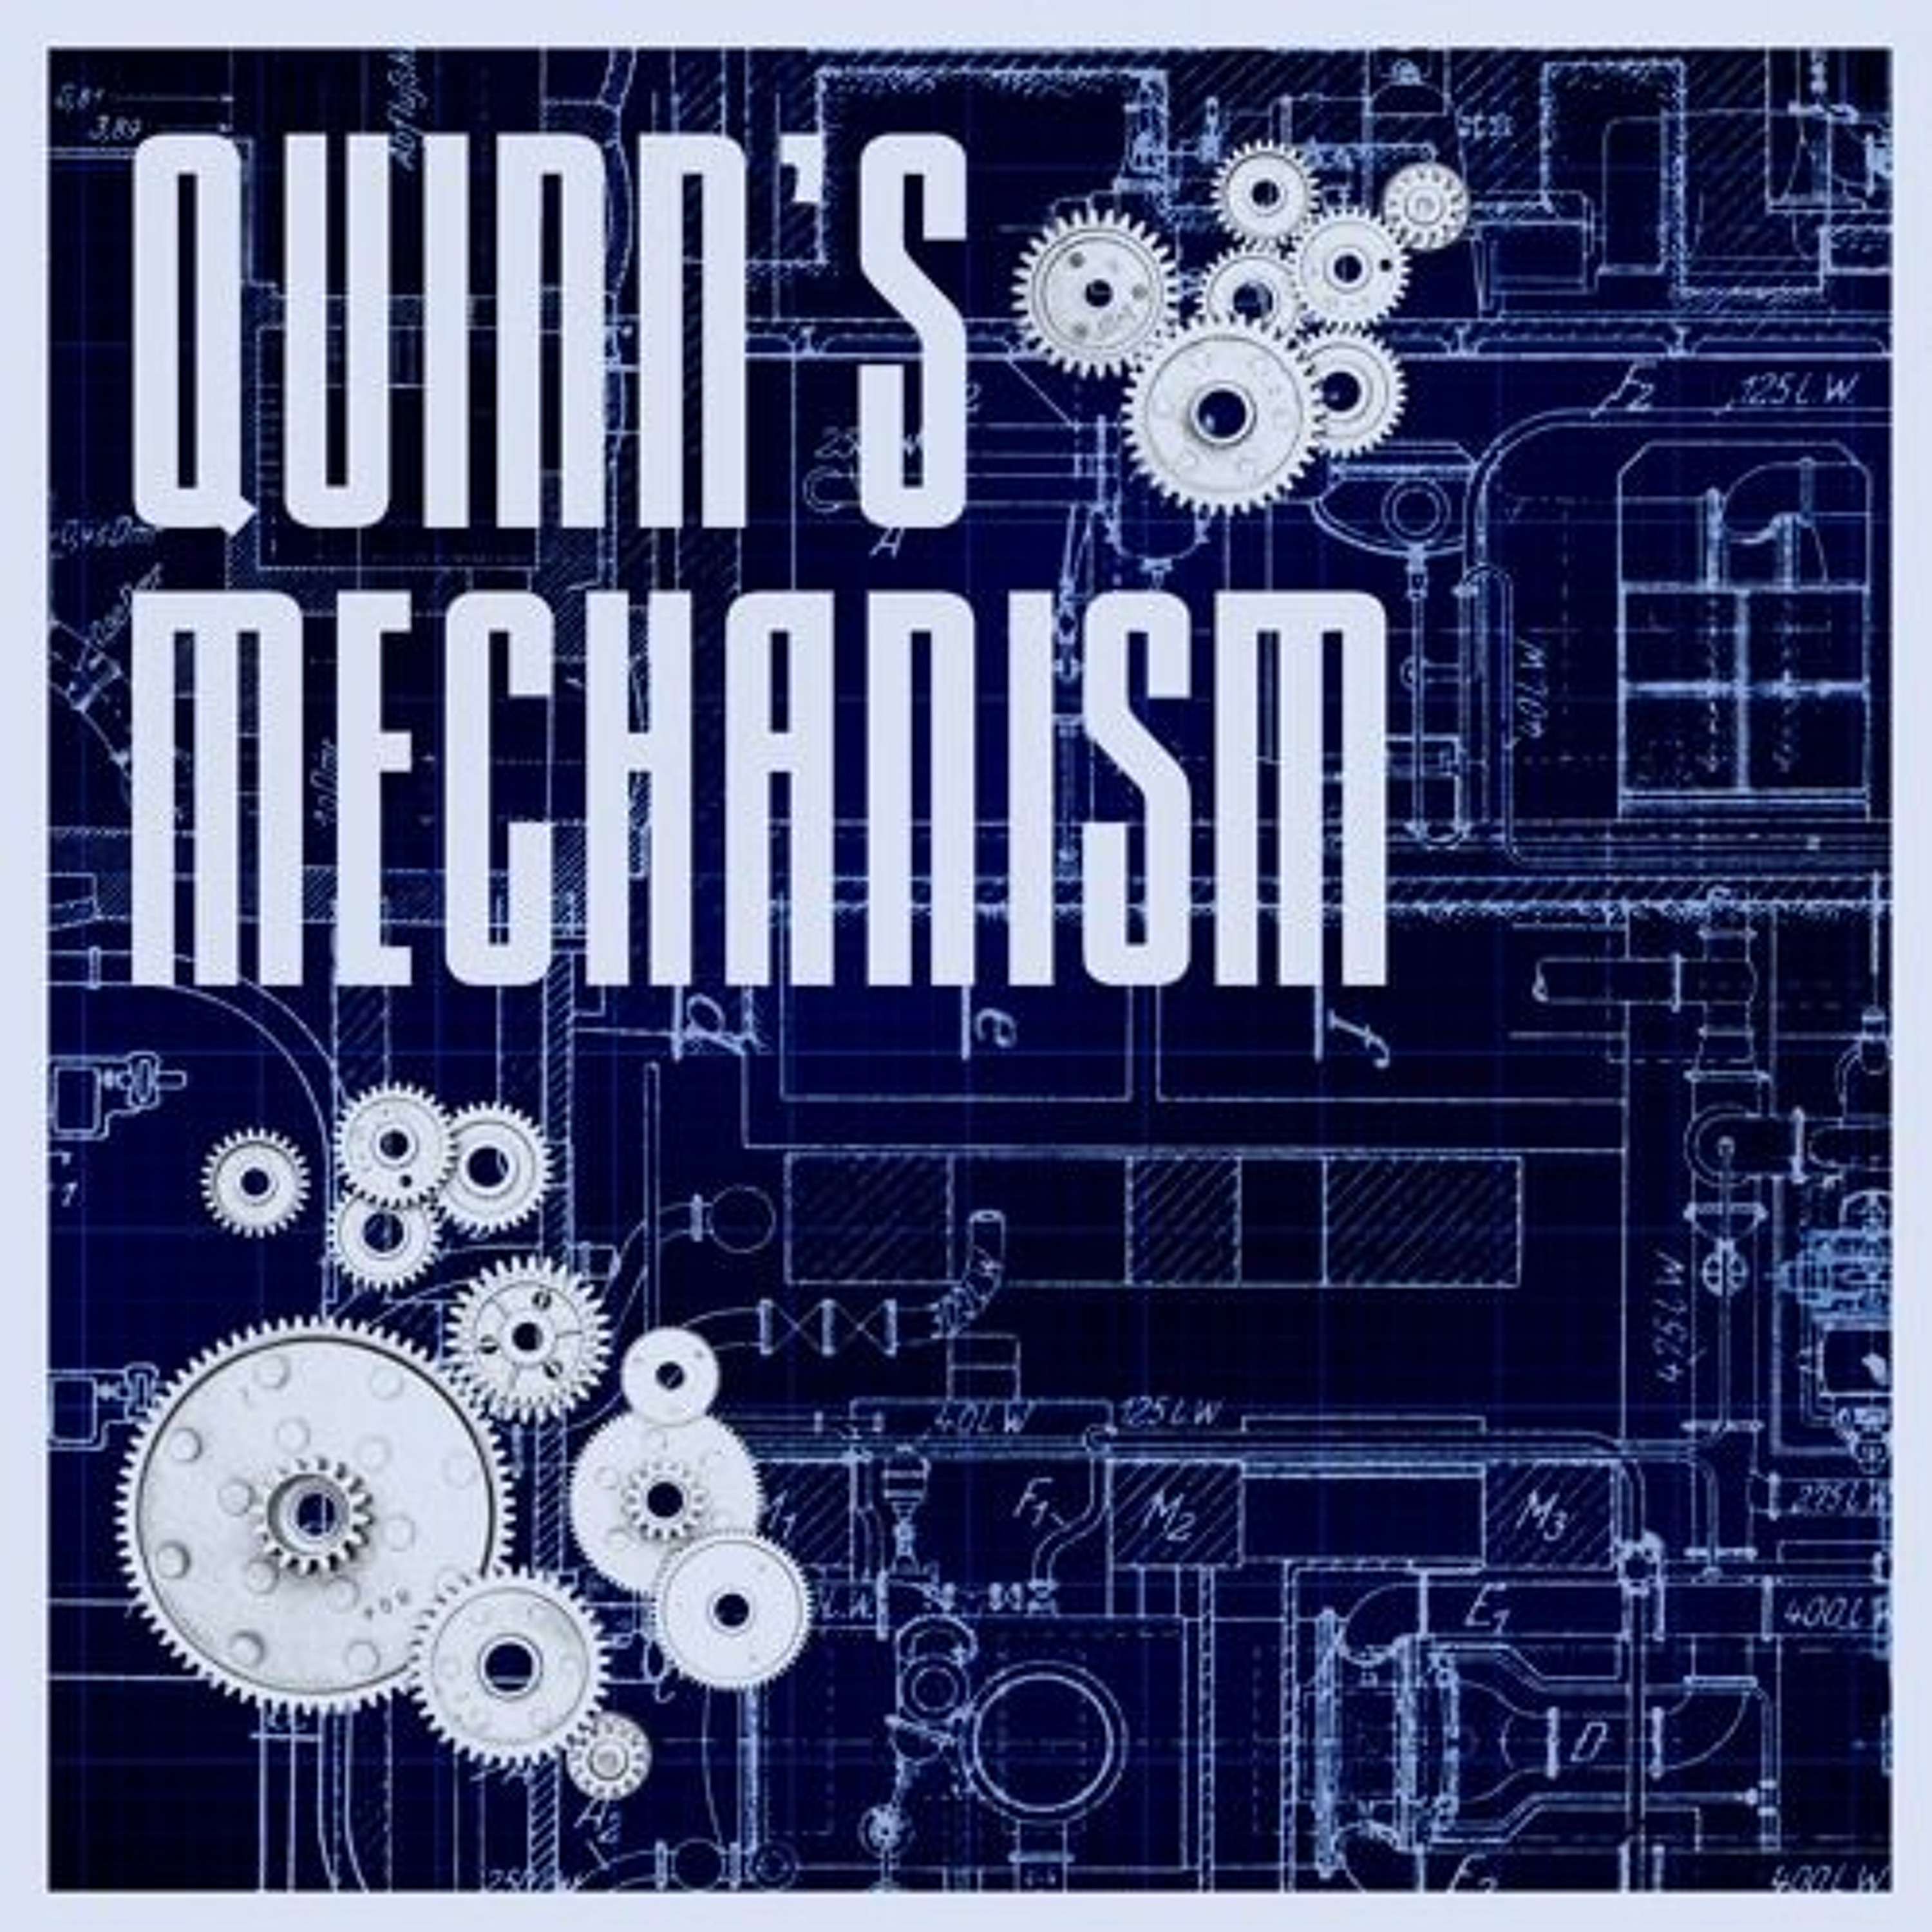 Quinn’s Mechanism - Third Act, The Fourth Component